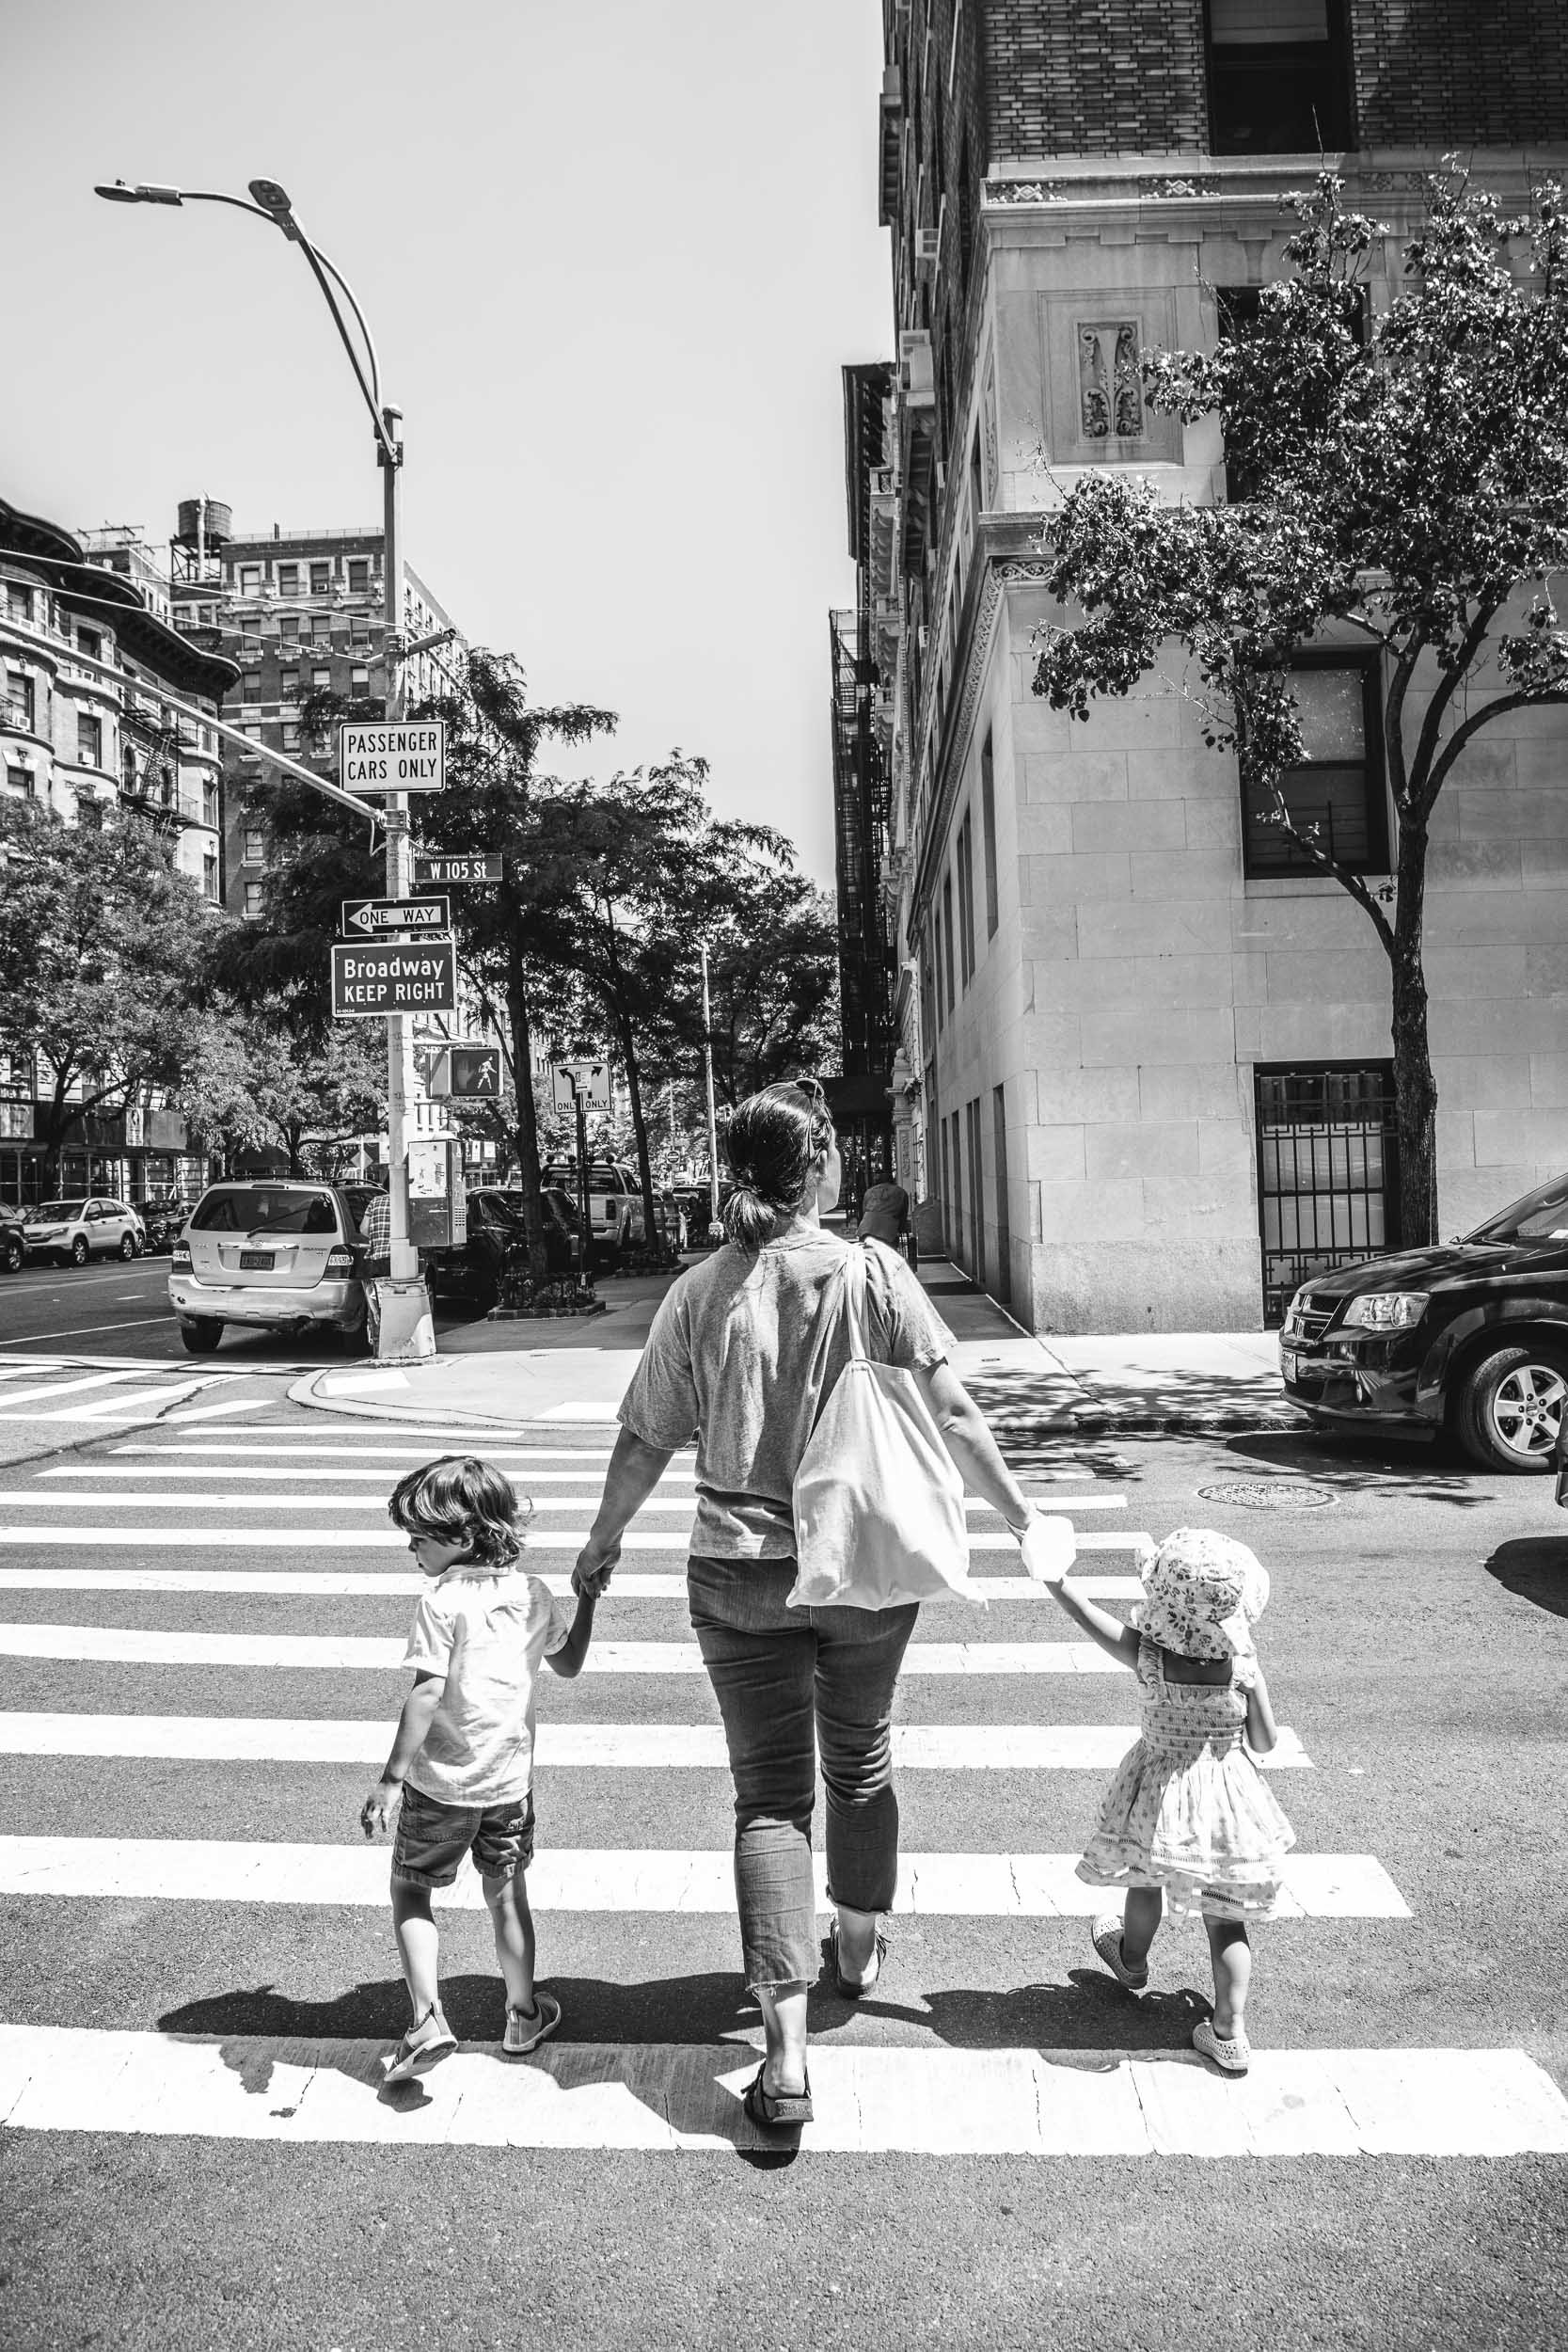  A mother holds her children's hands while crossing a street in NYC by Nicole Hawkins Photography. NYC lifestyle #NicoleHawkinsPhotograaphy #NicoleHawkinsChildren #NewYorkPortraits #KidsinNewYork #ChildrensPortraits #lifestyleportraits 